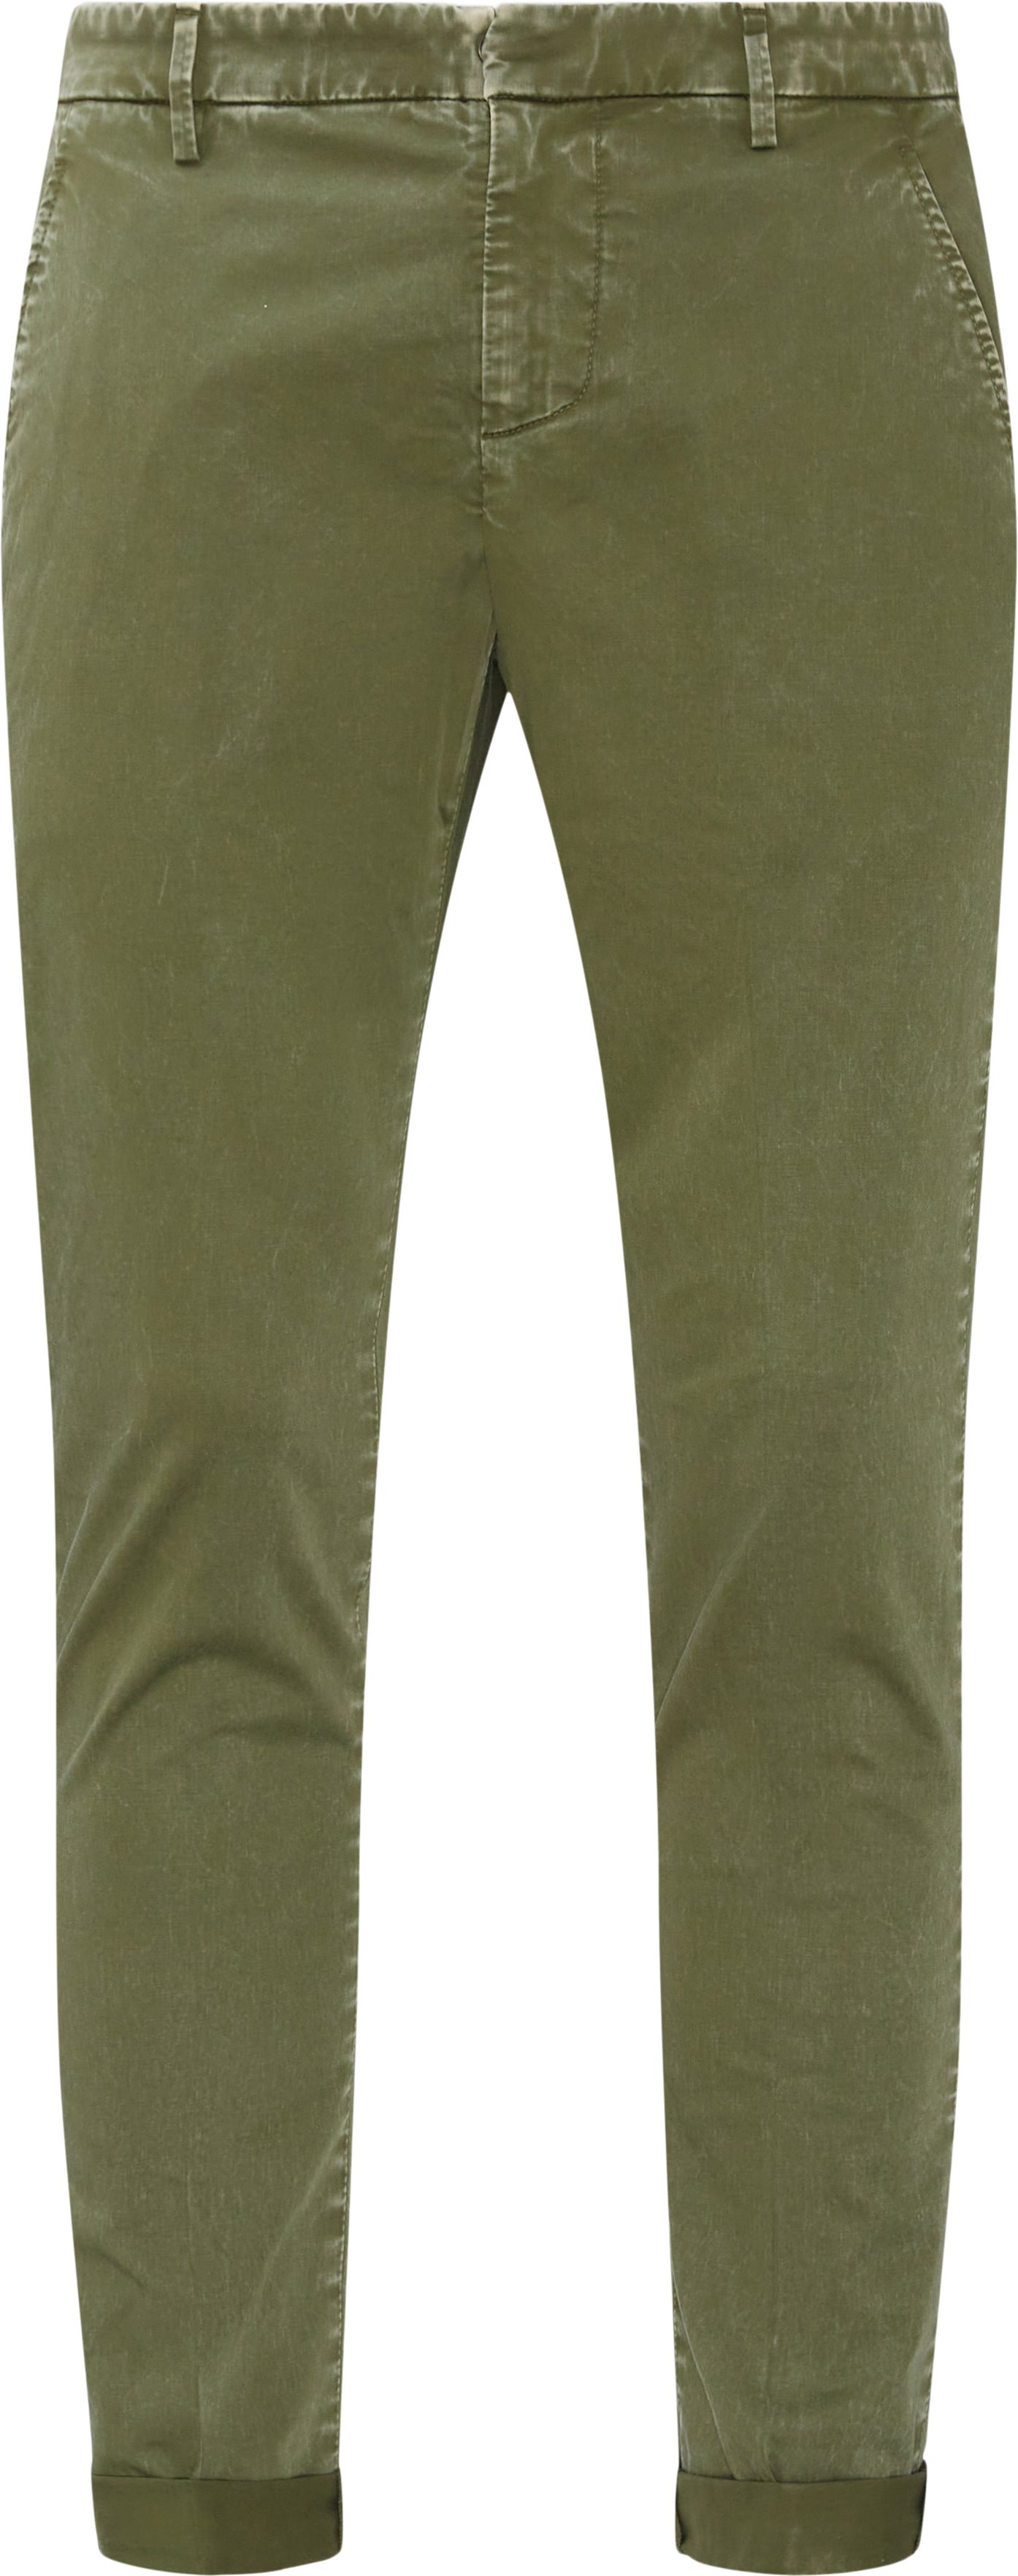 UP235 RSE036 Chinos - Bukser - Slim fit - Army